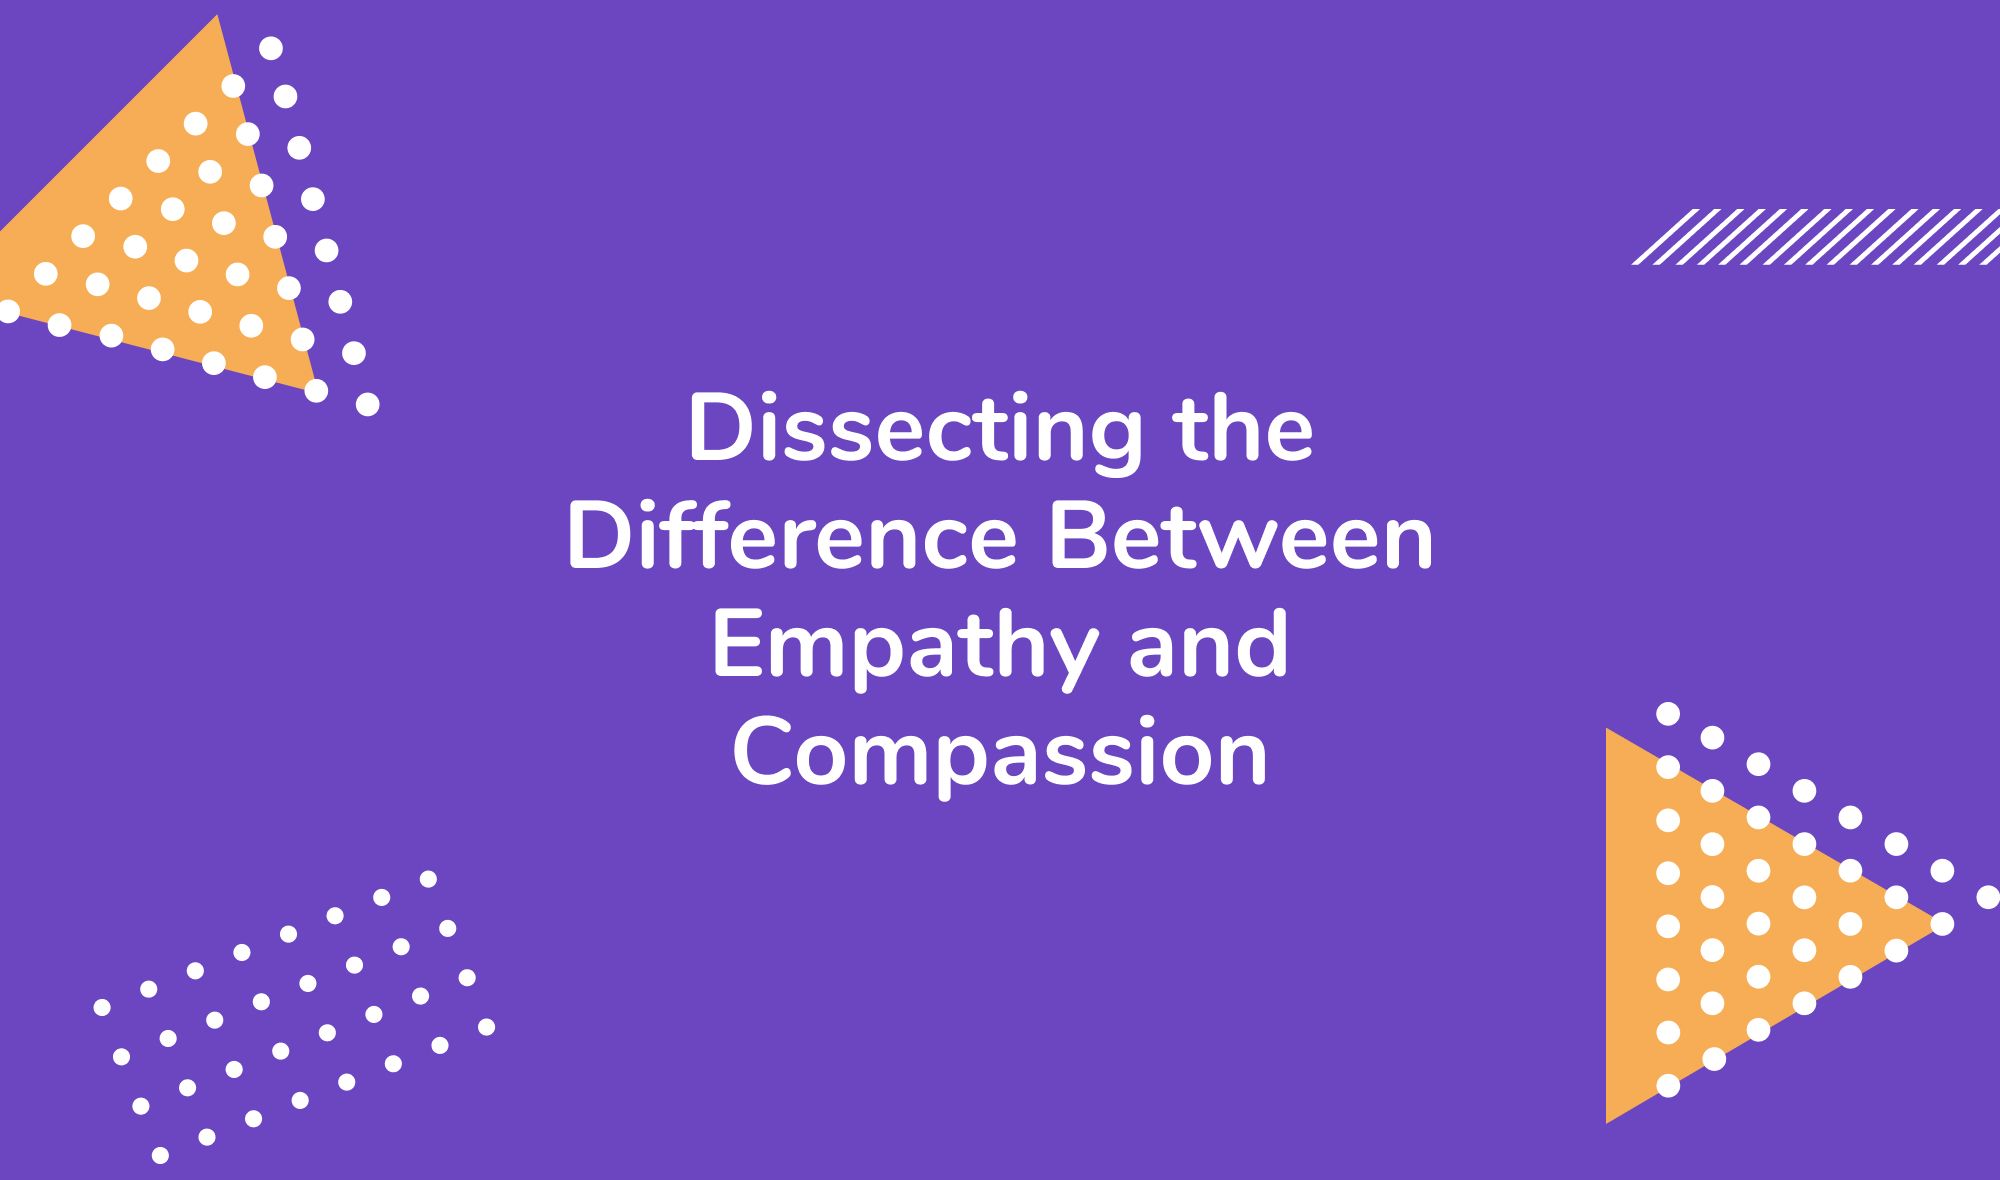 Dissecting the Difference Between Empathy and Compassion